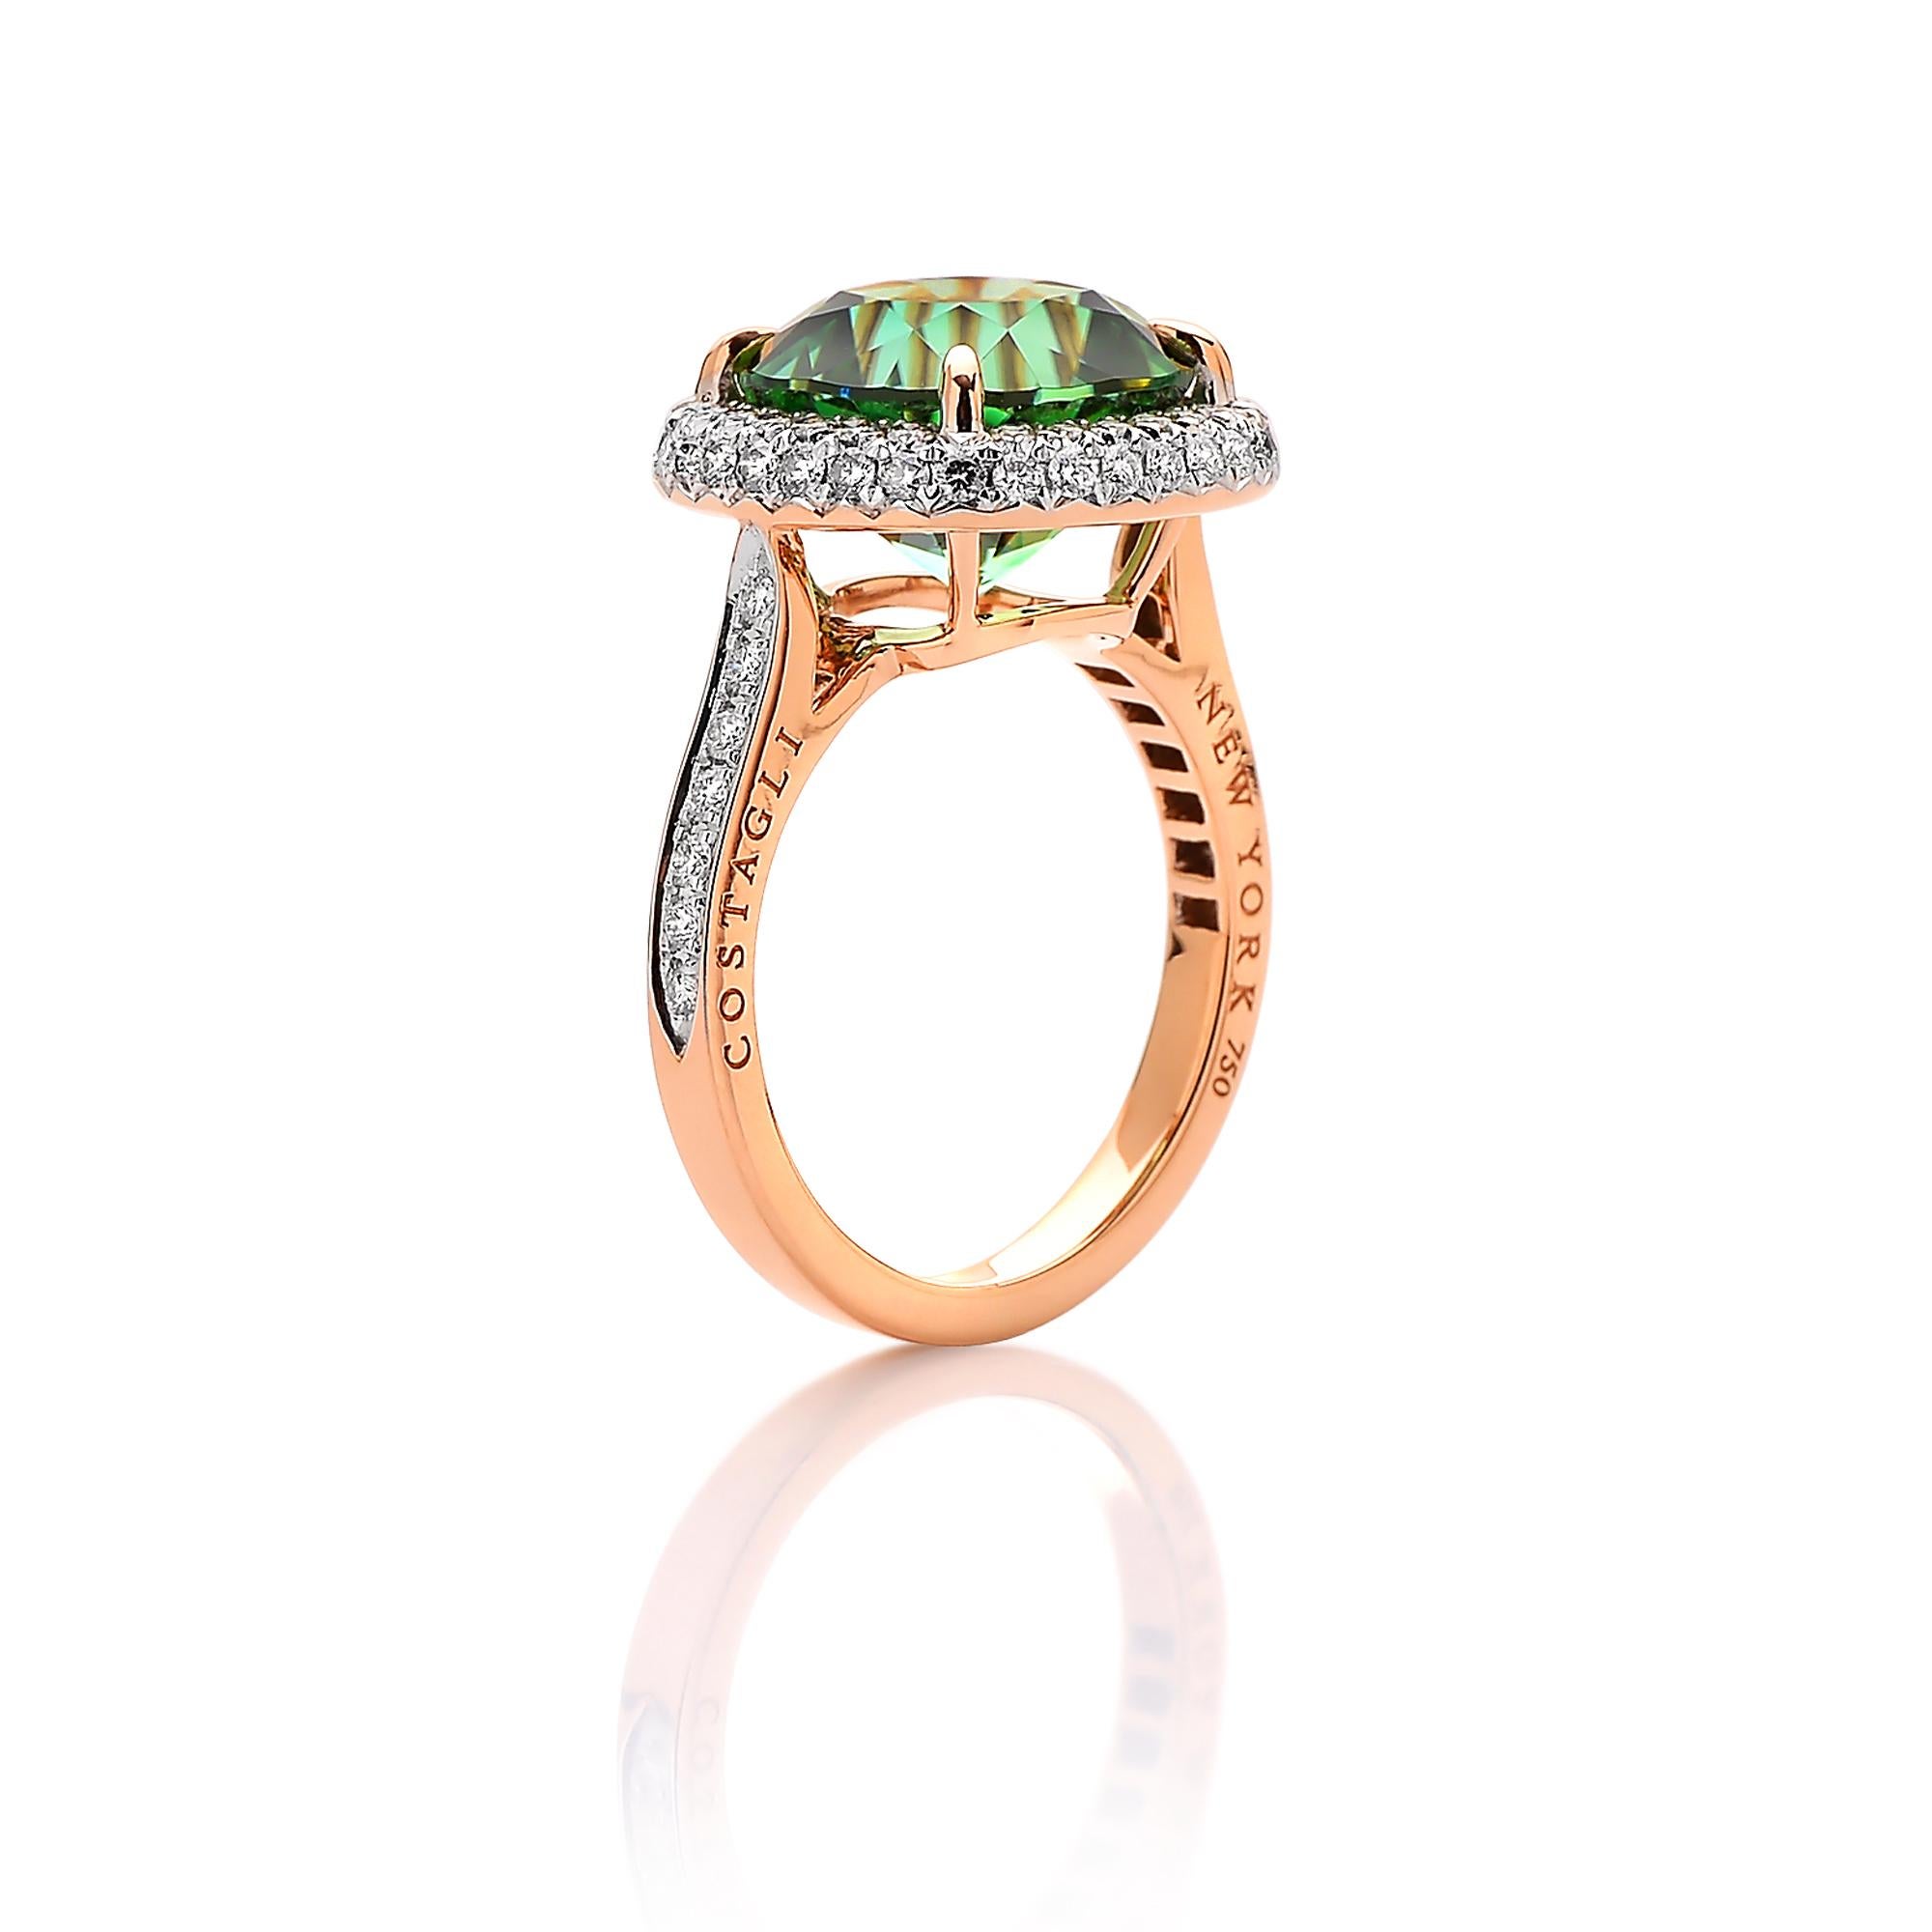 18 karat rose gold ring set with a cushion-cut mint tourmaline and pave-set round, brilliant diamonds. 

Each Paolo Costagli contemporary engagement ring is a one of a kind, handcrafted testament to your love story. The beauty is in the details-